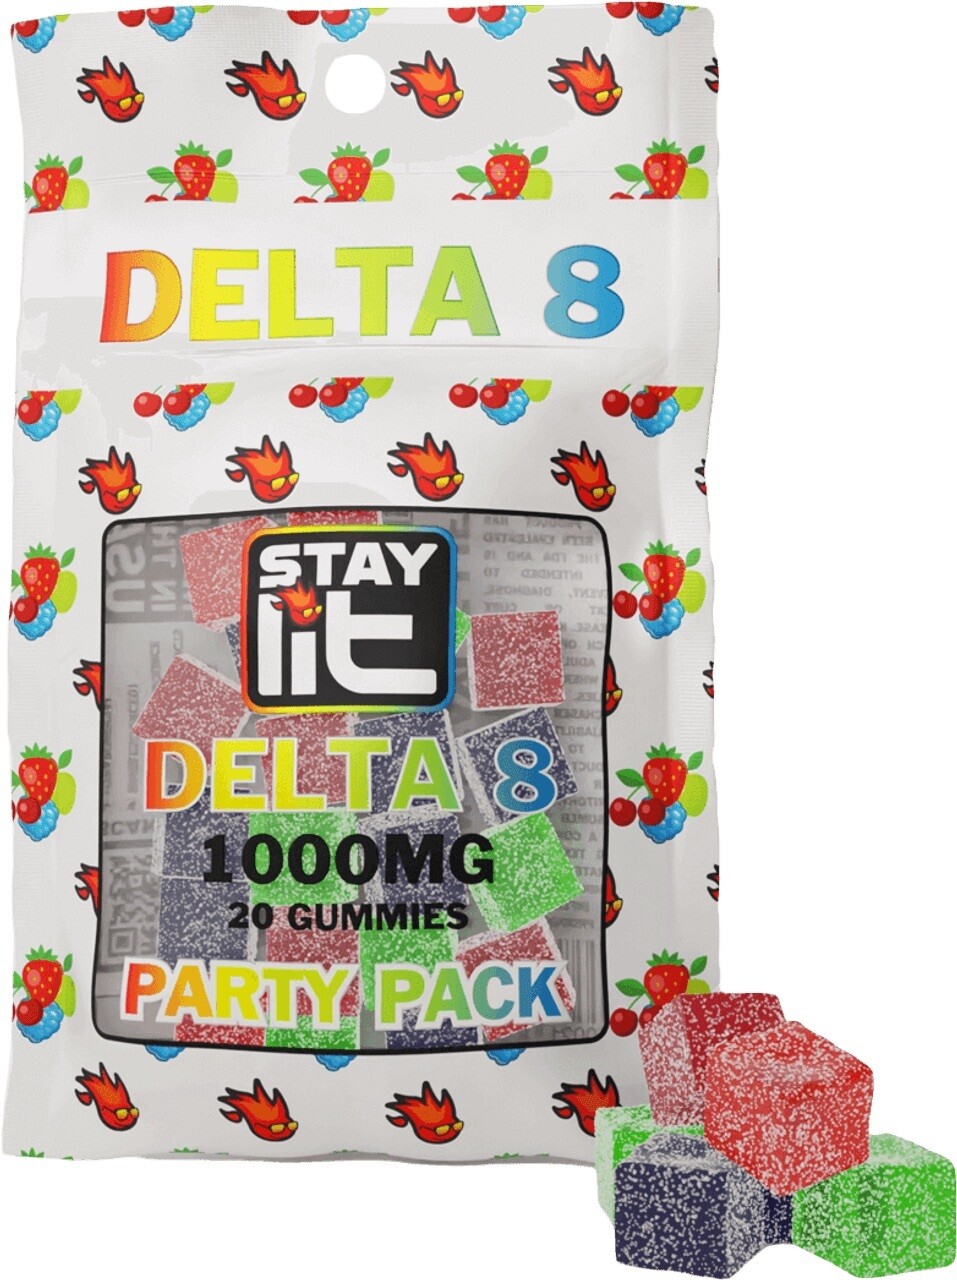 Stay Lit Chews Delta 8 Party Pack 1000mg Edible